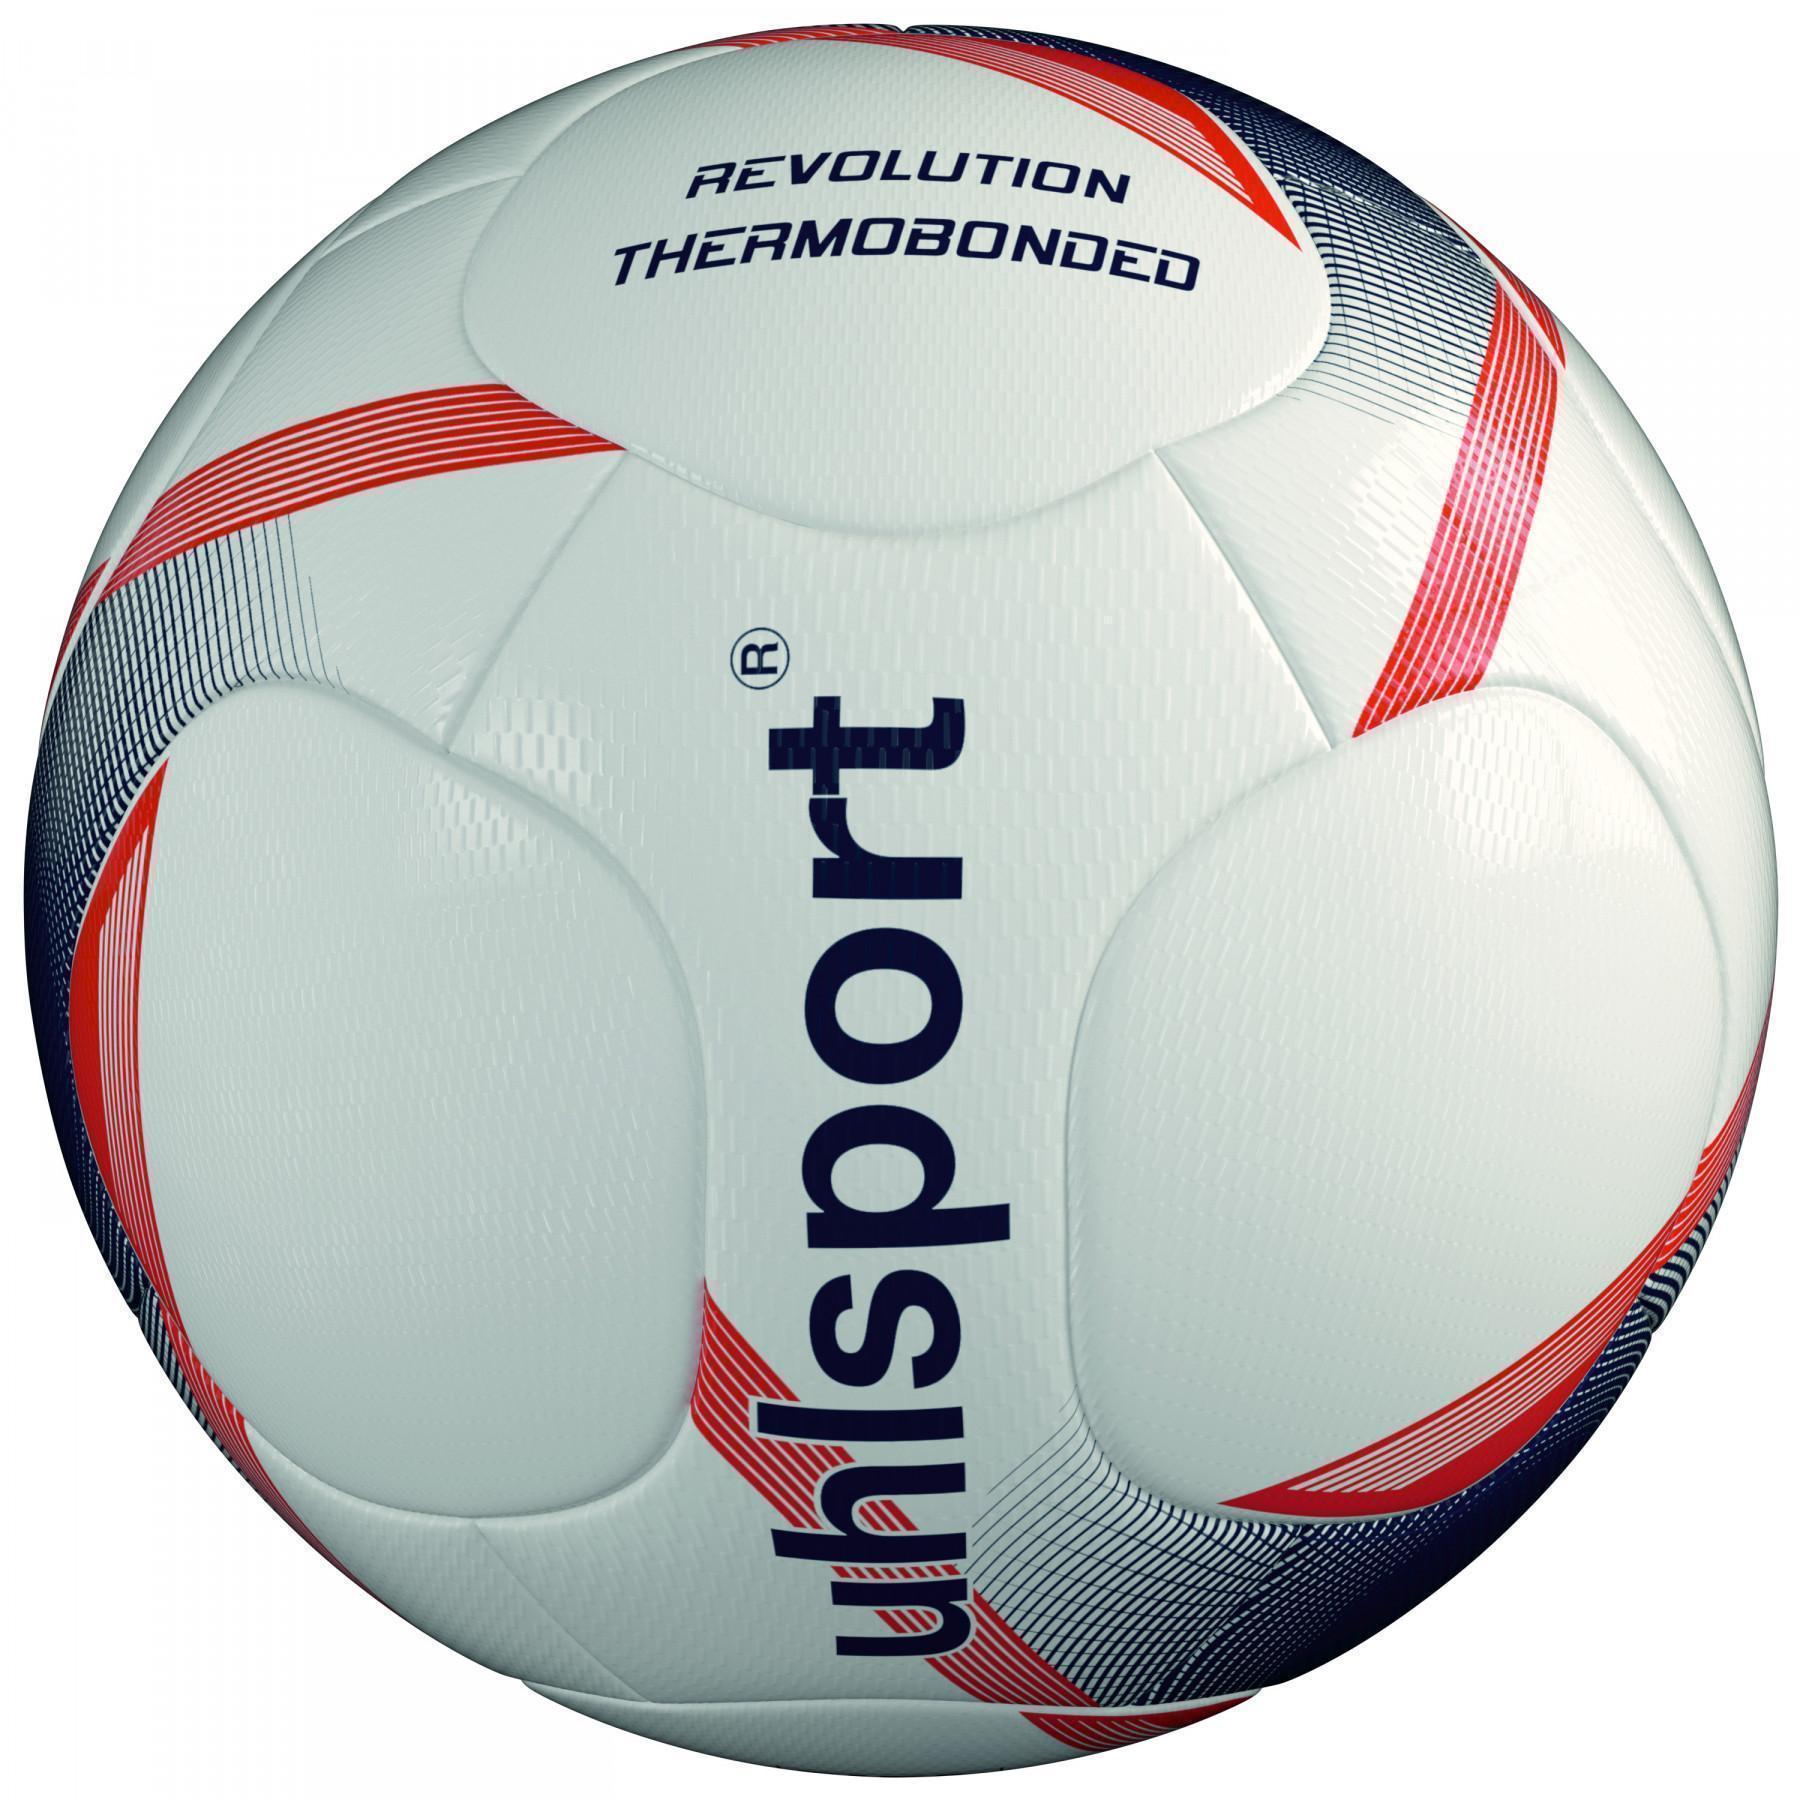 Ballong Uhlsport Revolution Thermobonded